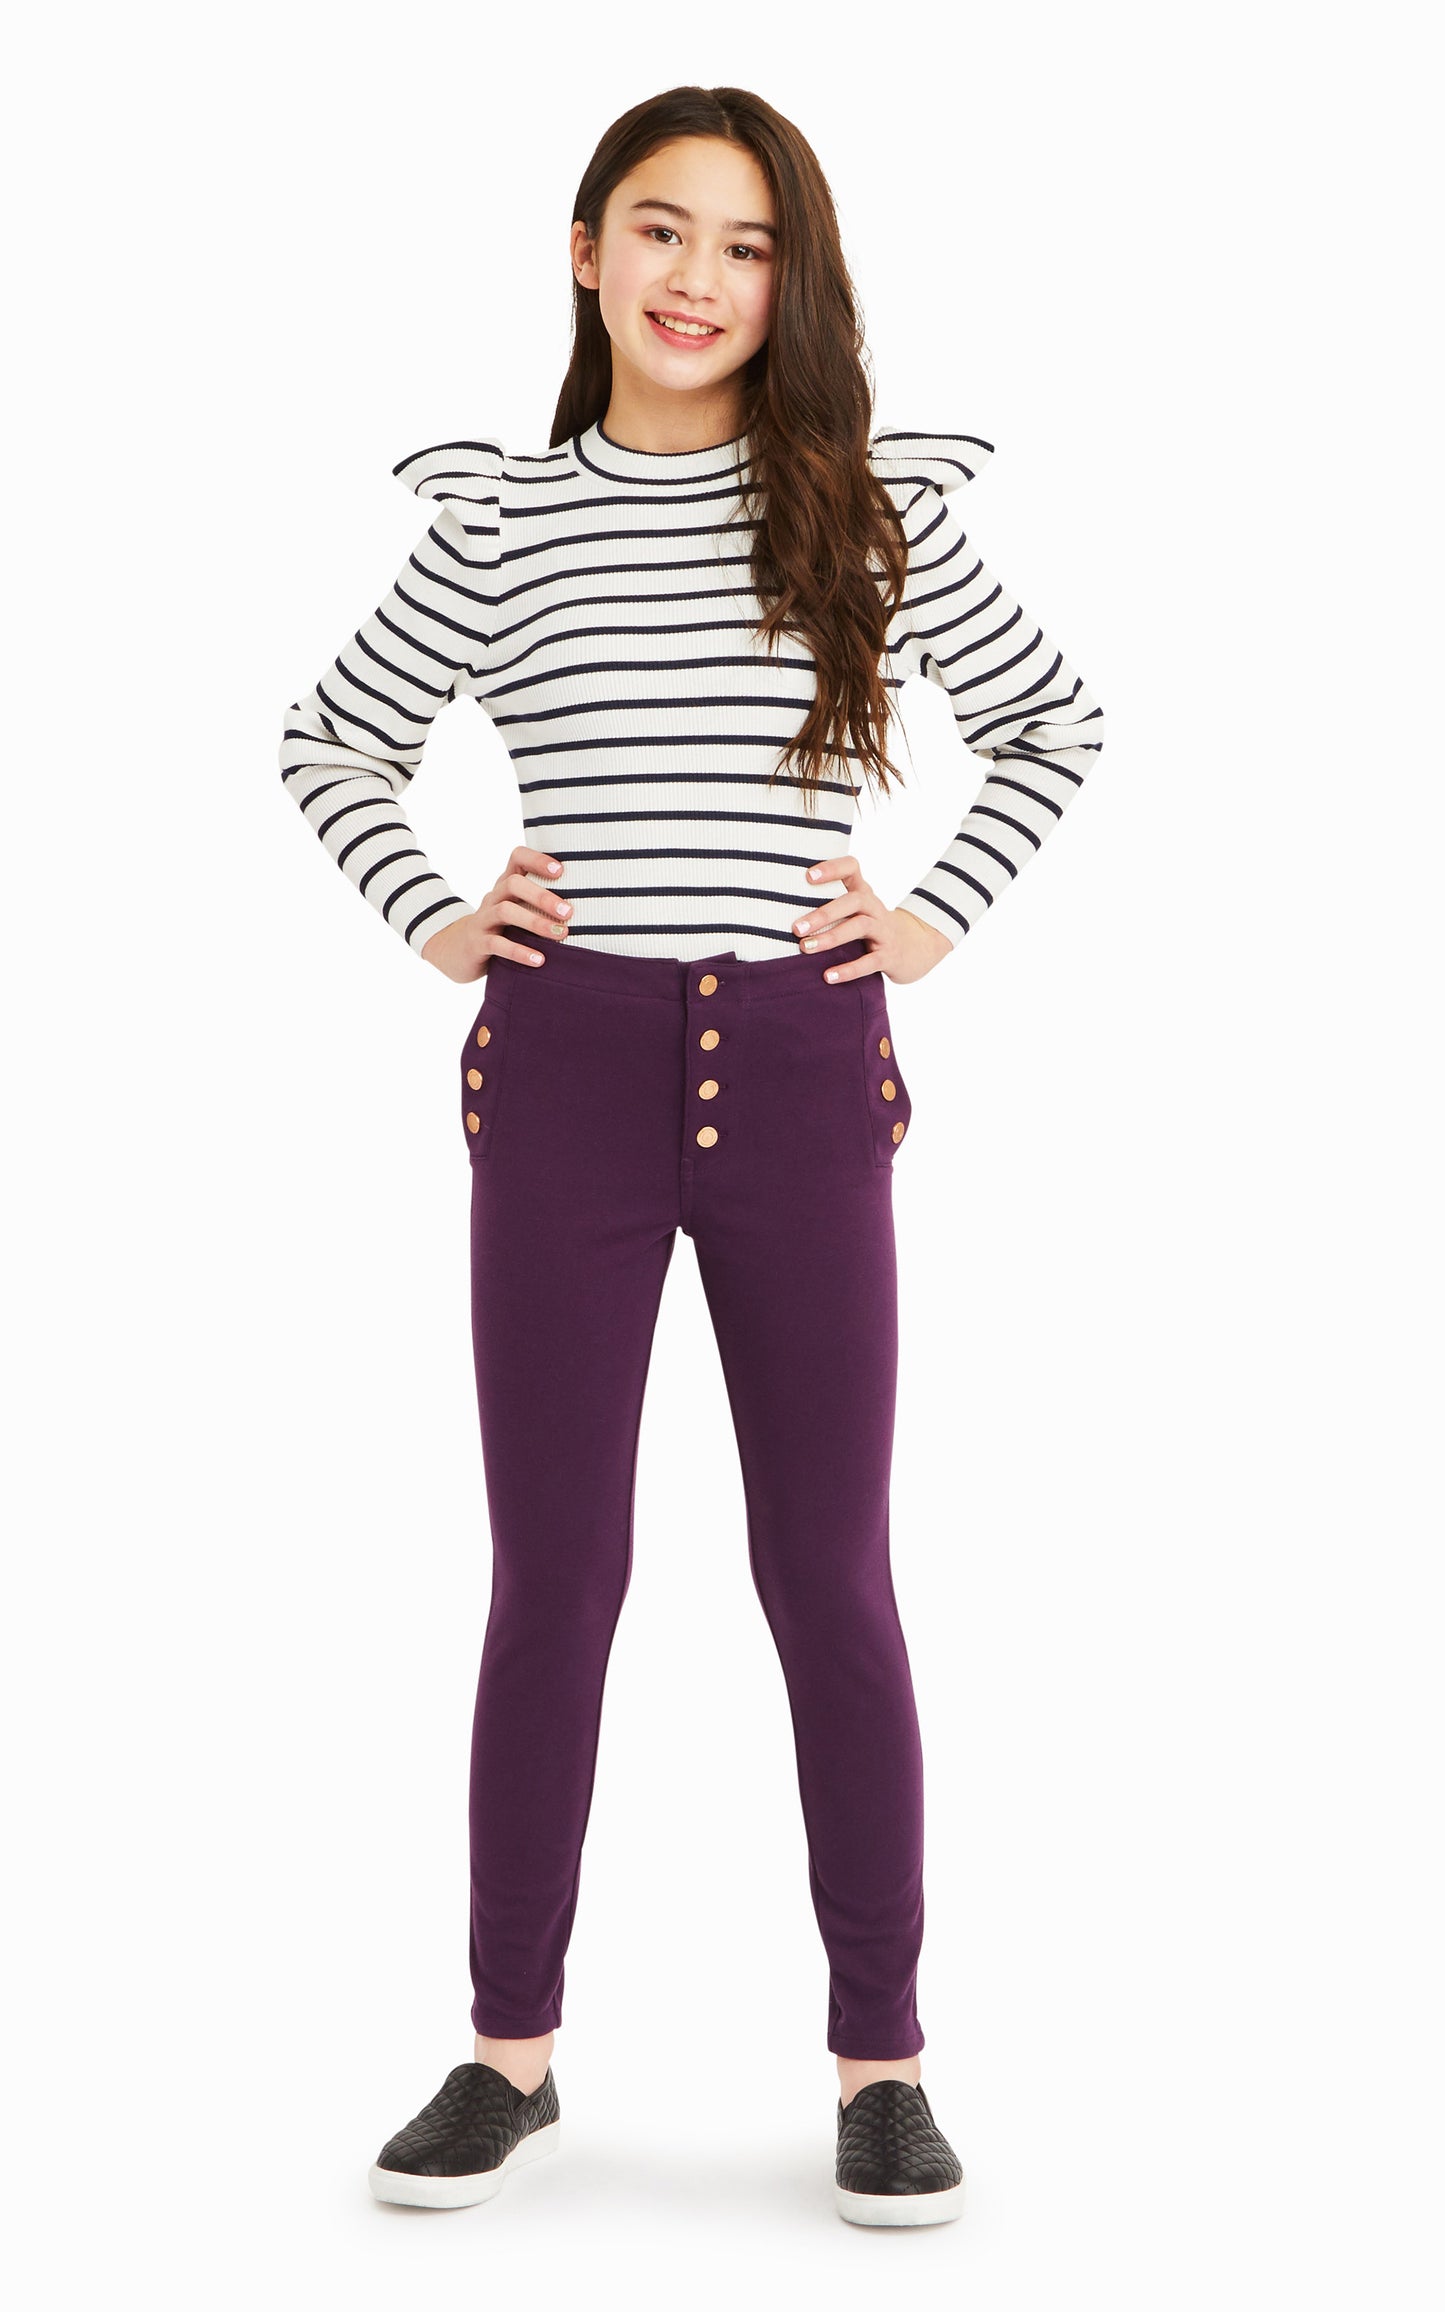 Girl wearing white and black-striped long-sleeve top with purple snap-front pants.